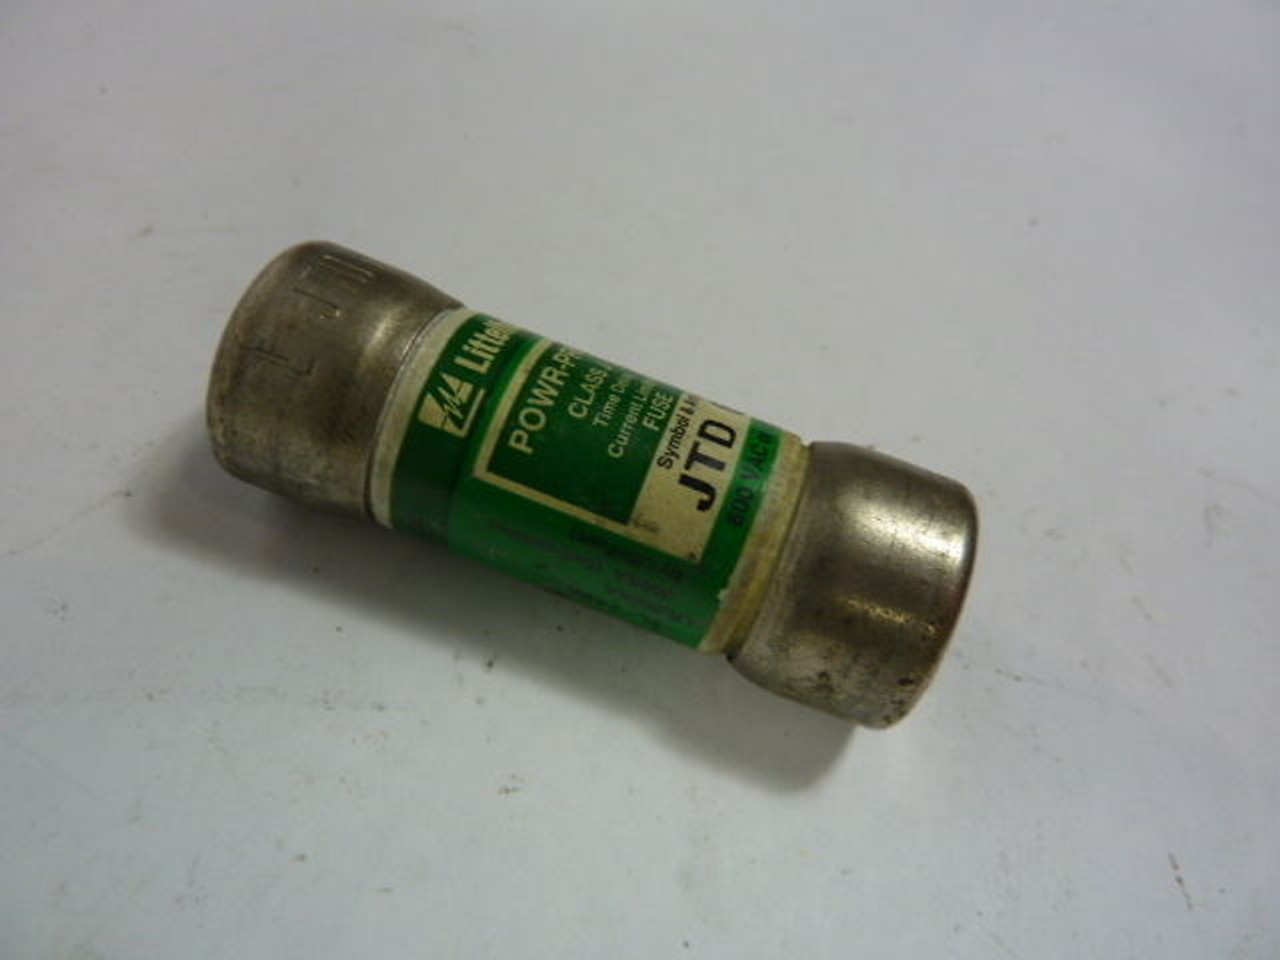 Littelfuse JTD-6 Time Delay Fuse 6A 600V USED